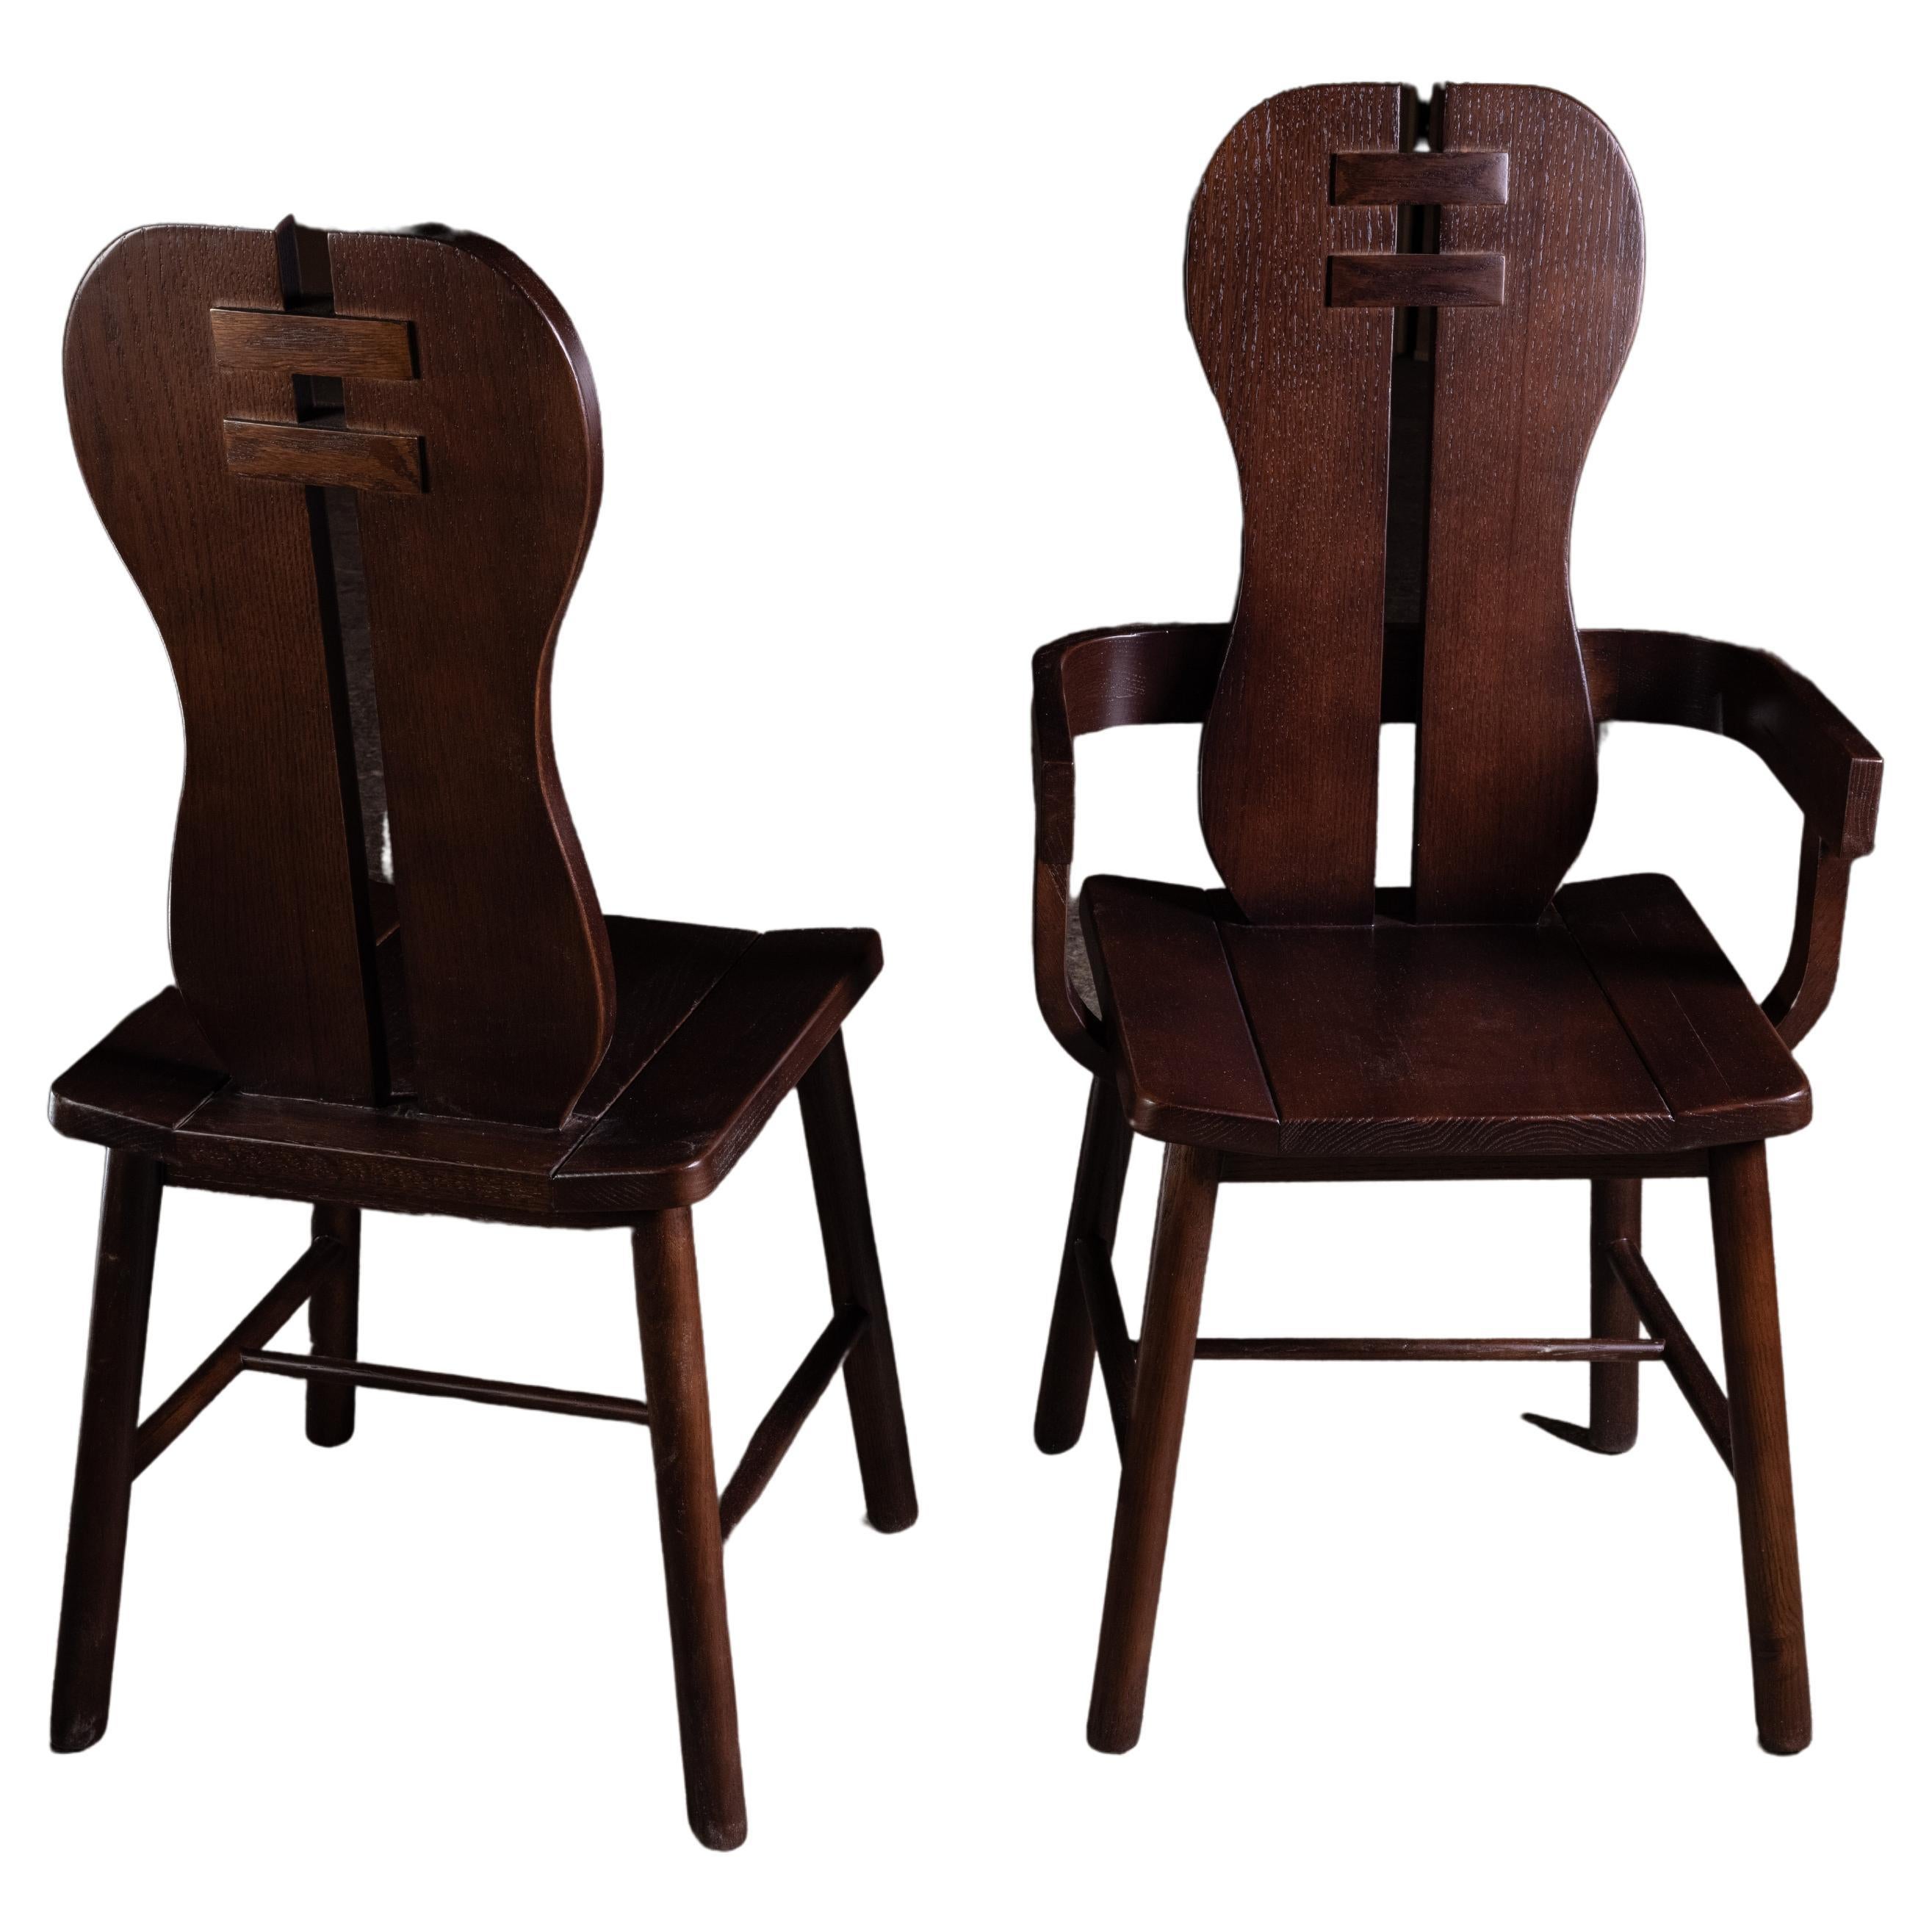 Mr. W Dining Oak Chairs For Sale